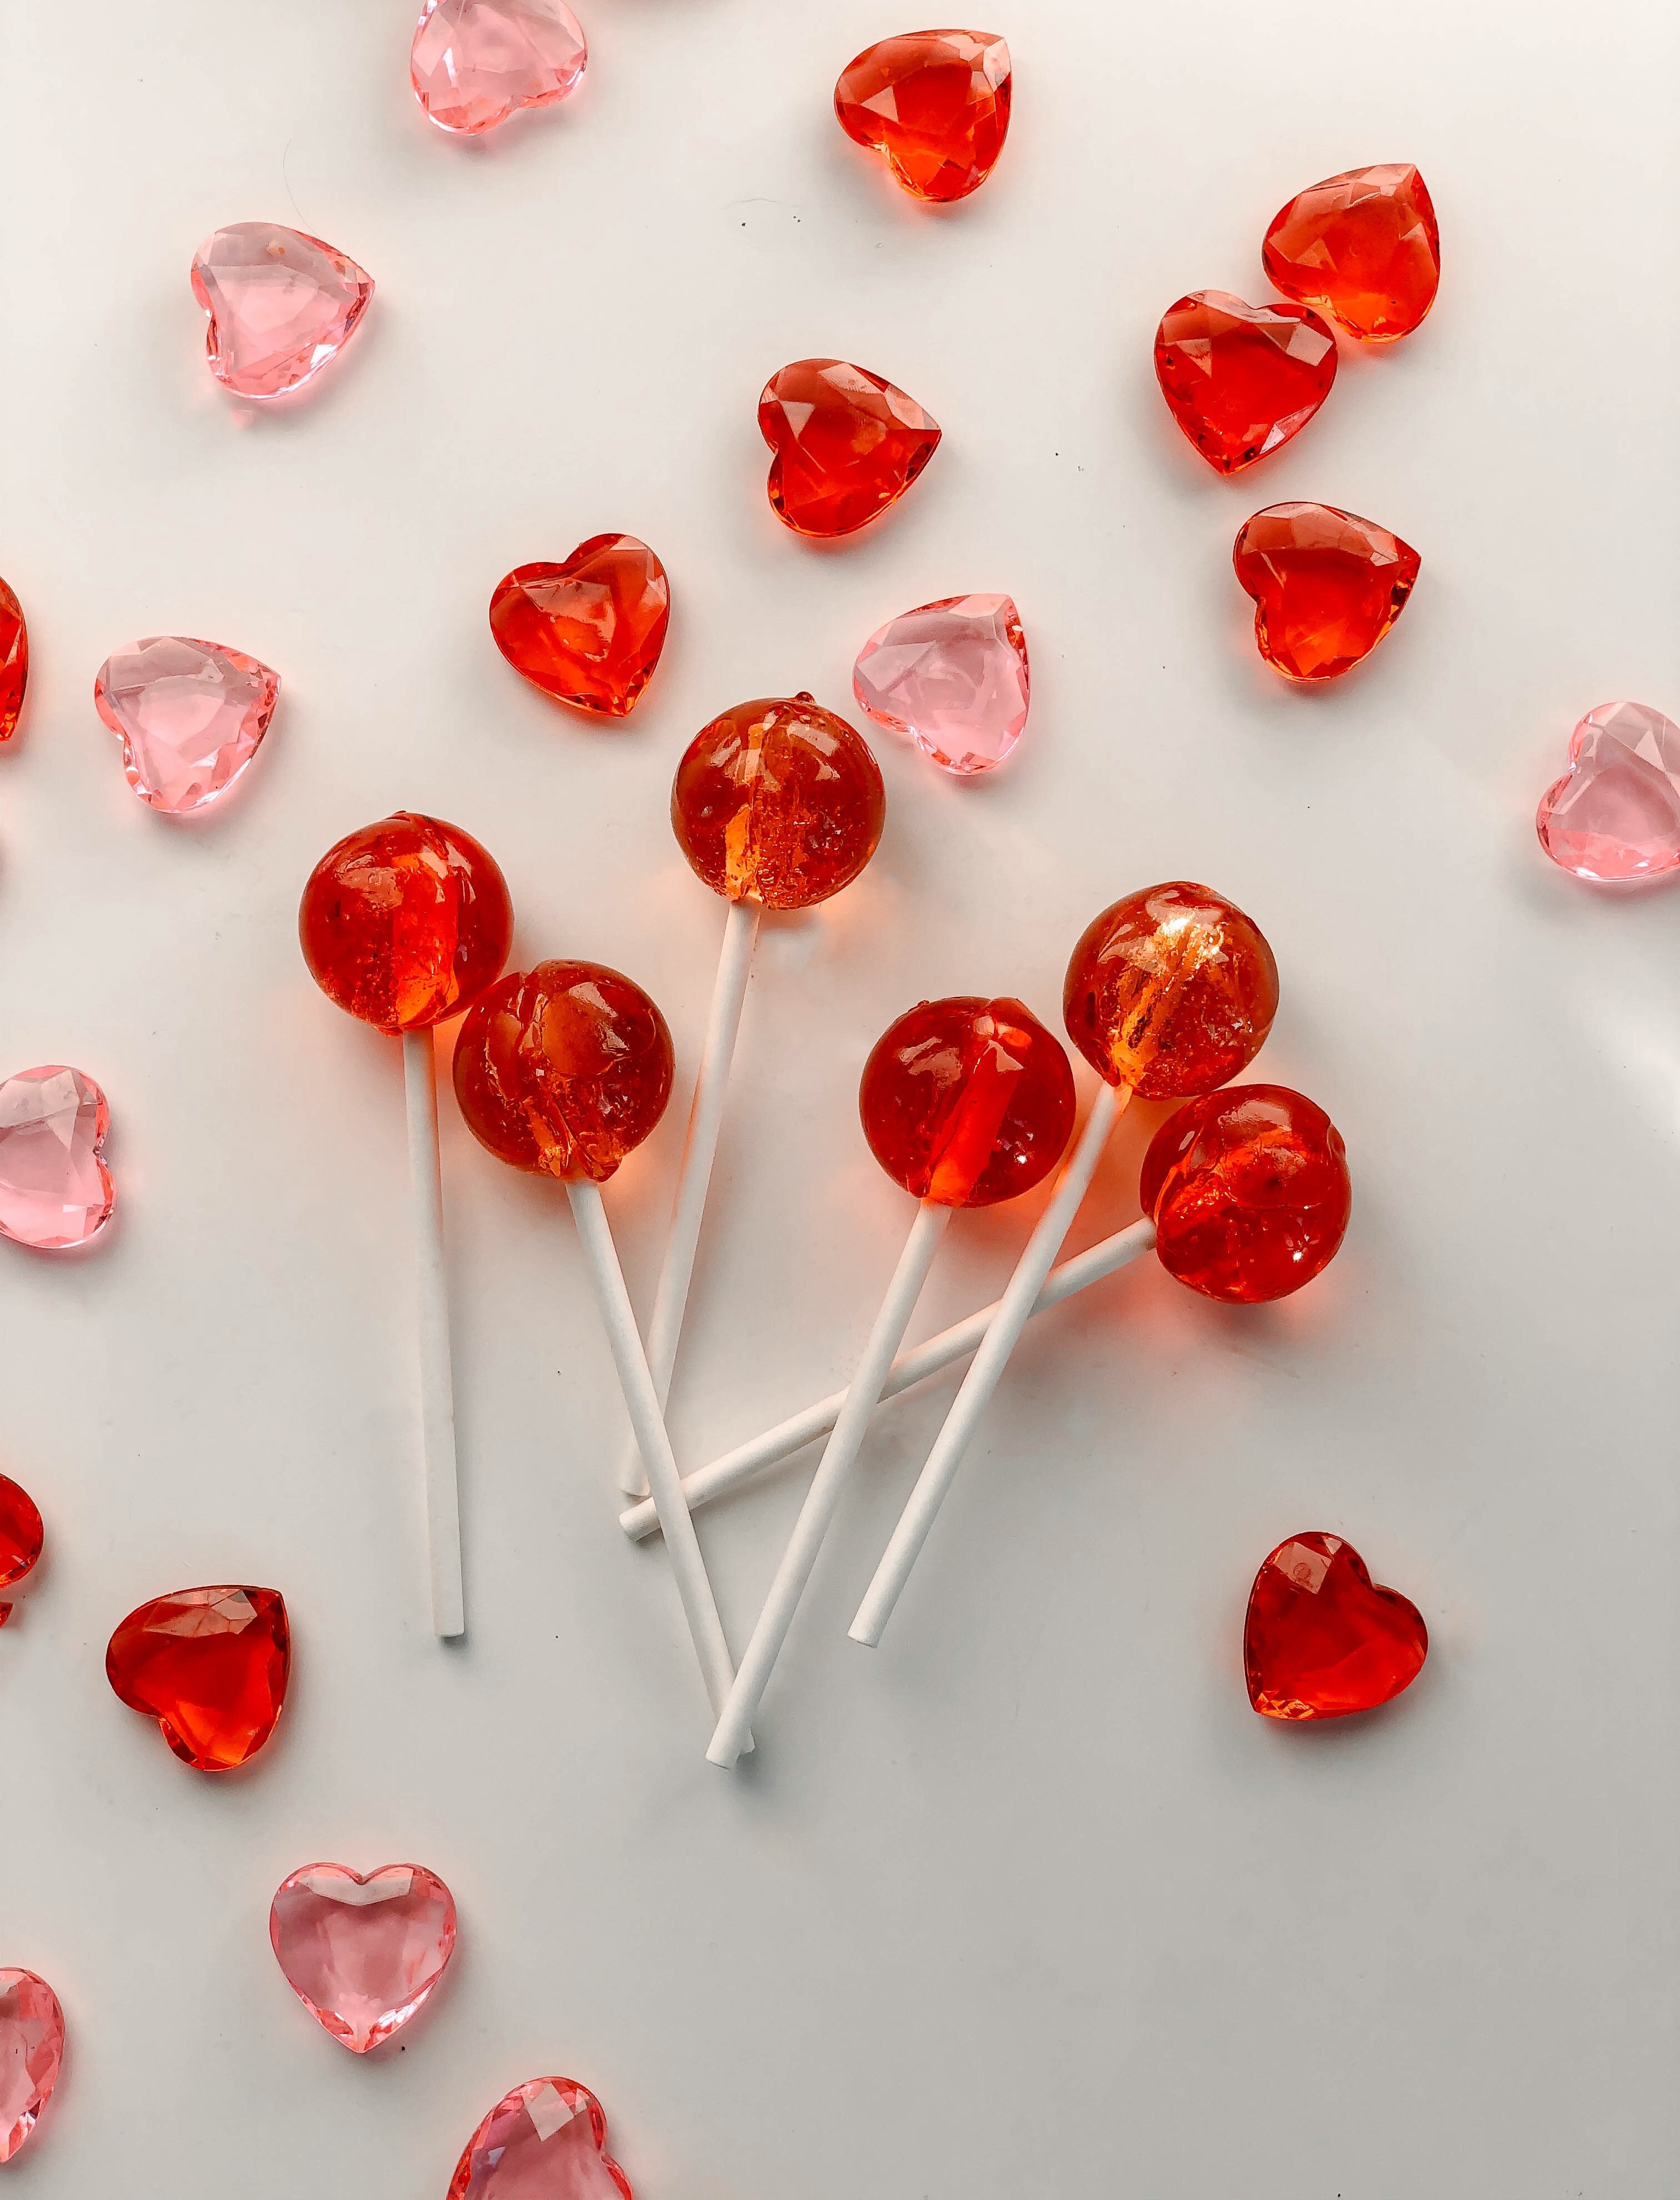 92285 download wallpaper food, hearts, pink, candies, red, lollipops screensavers and pictures for free